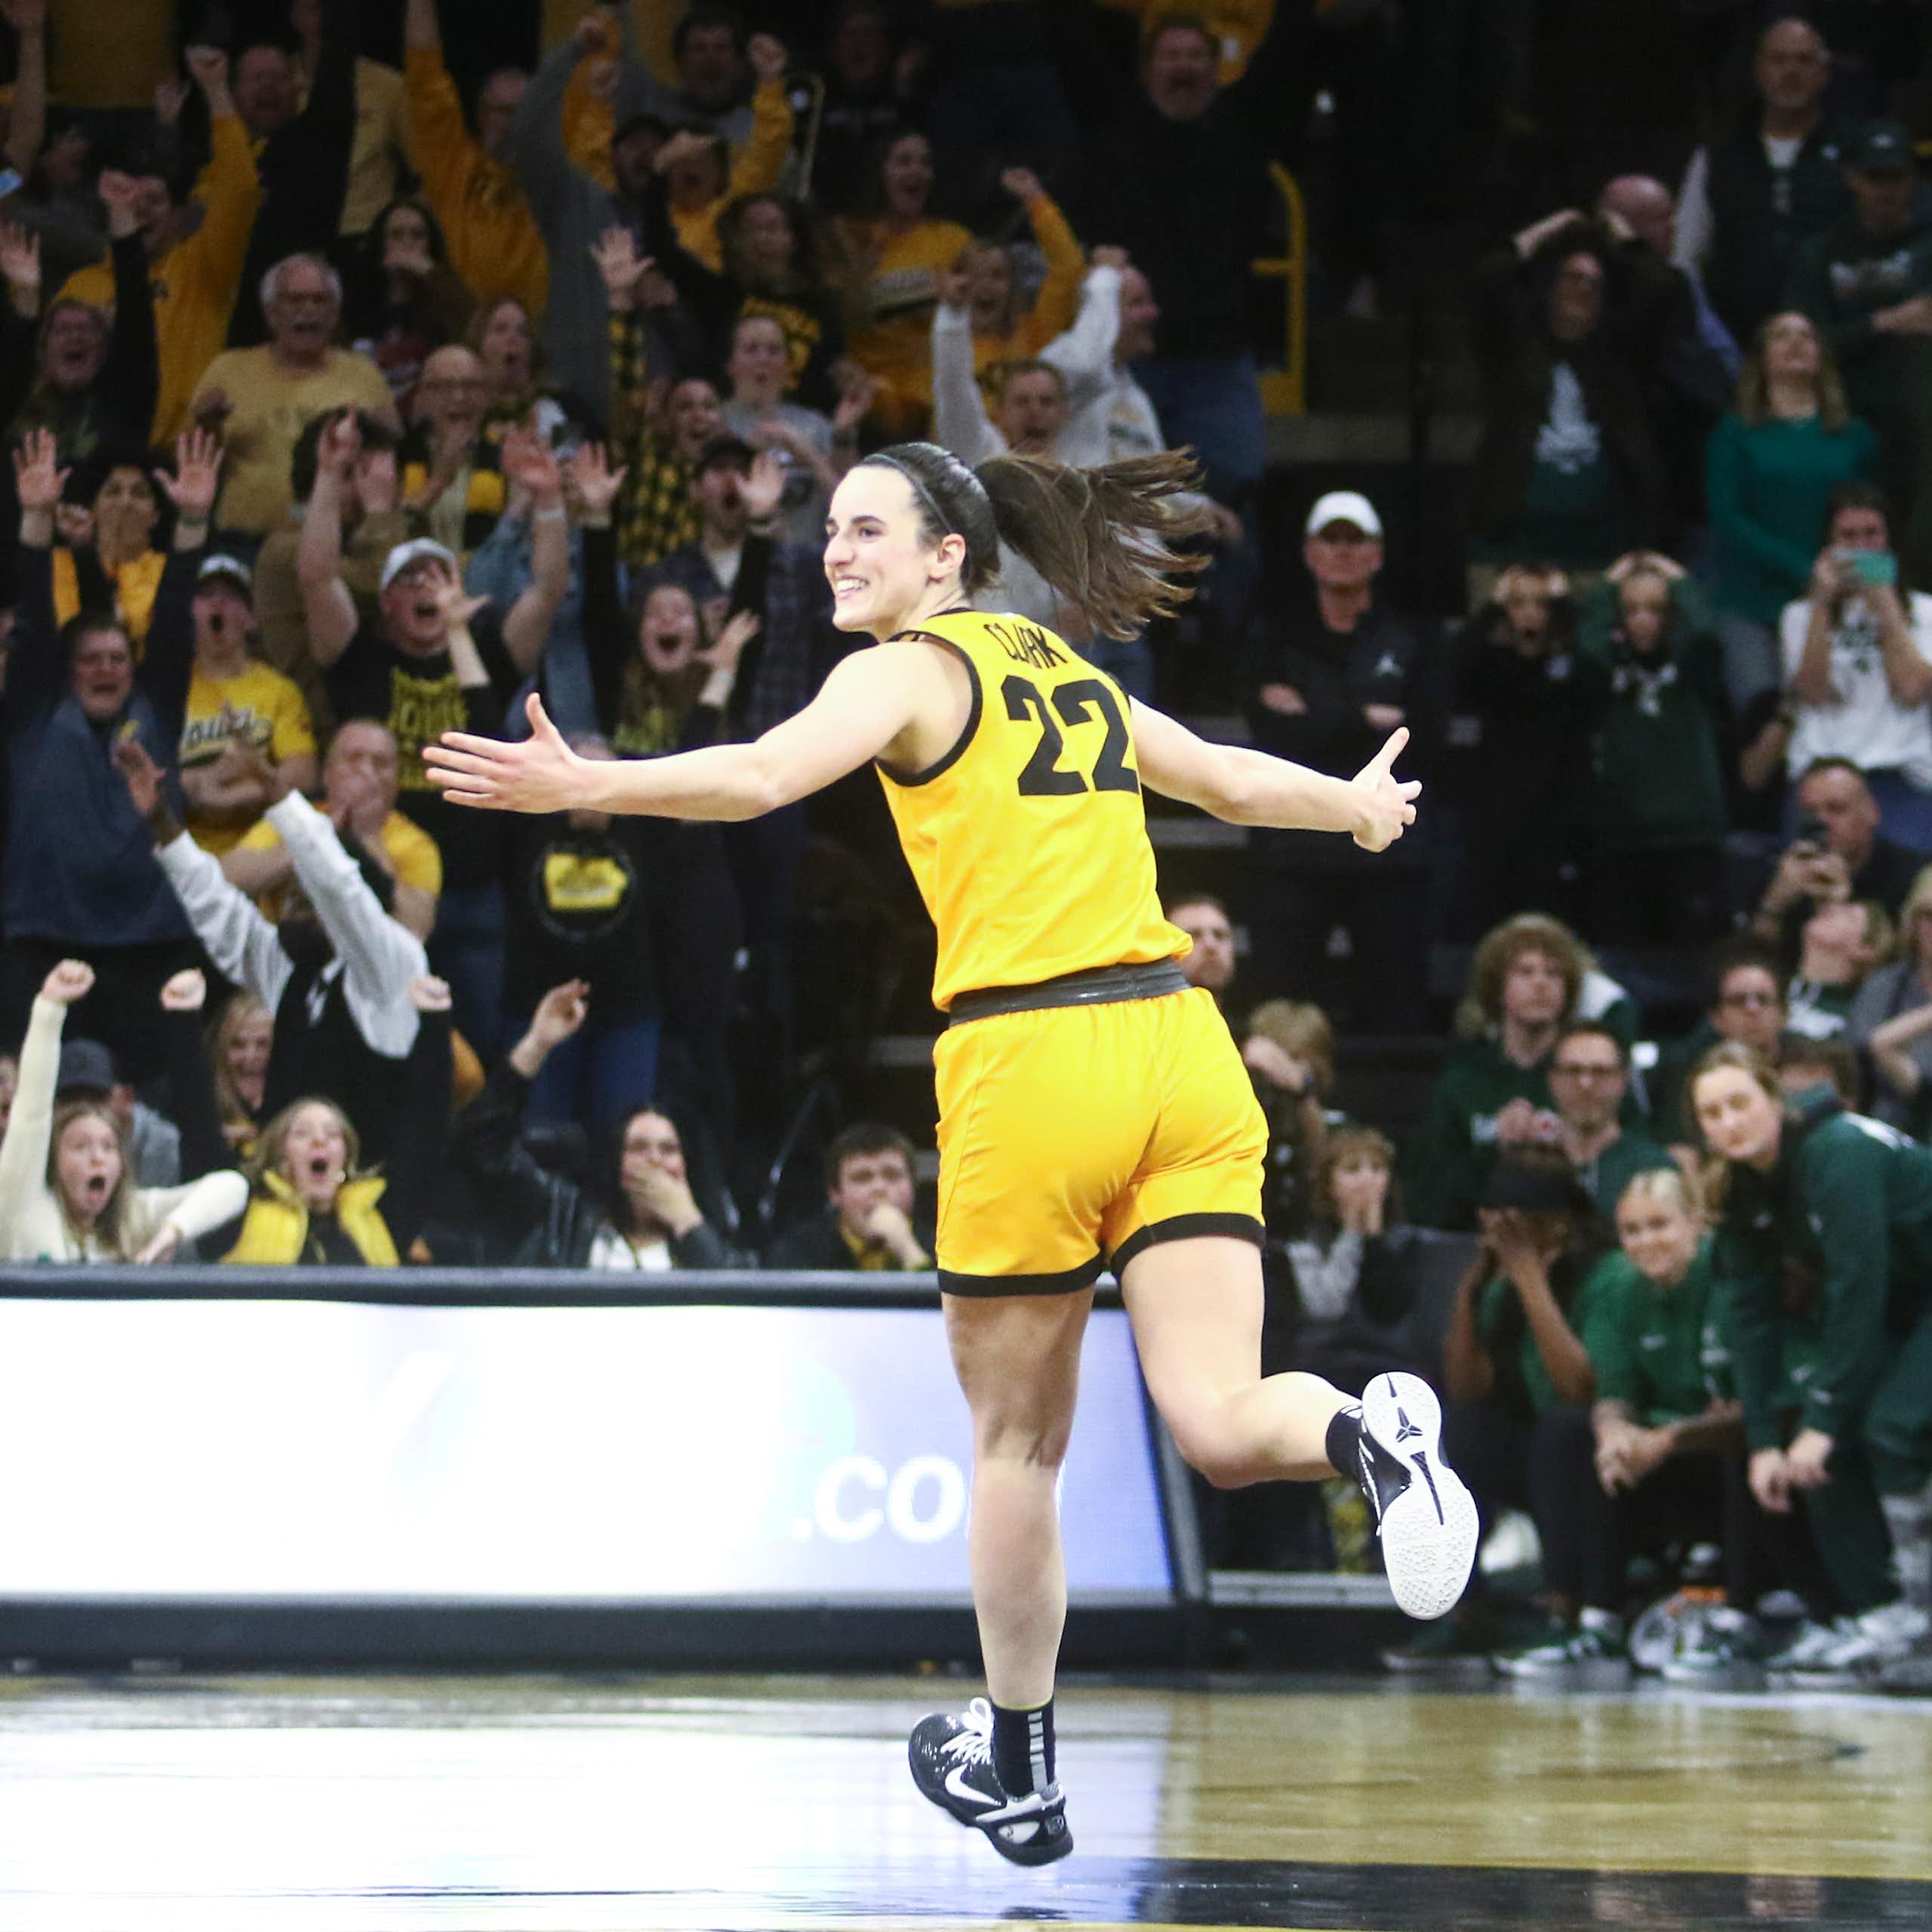 Young woman in yellow basketball uniform spreads her arms and smiles as she sprints down the court. The crowd in the background cheers wildly.